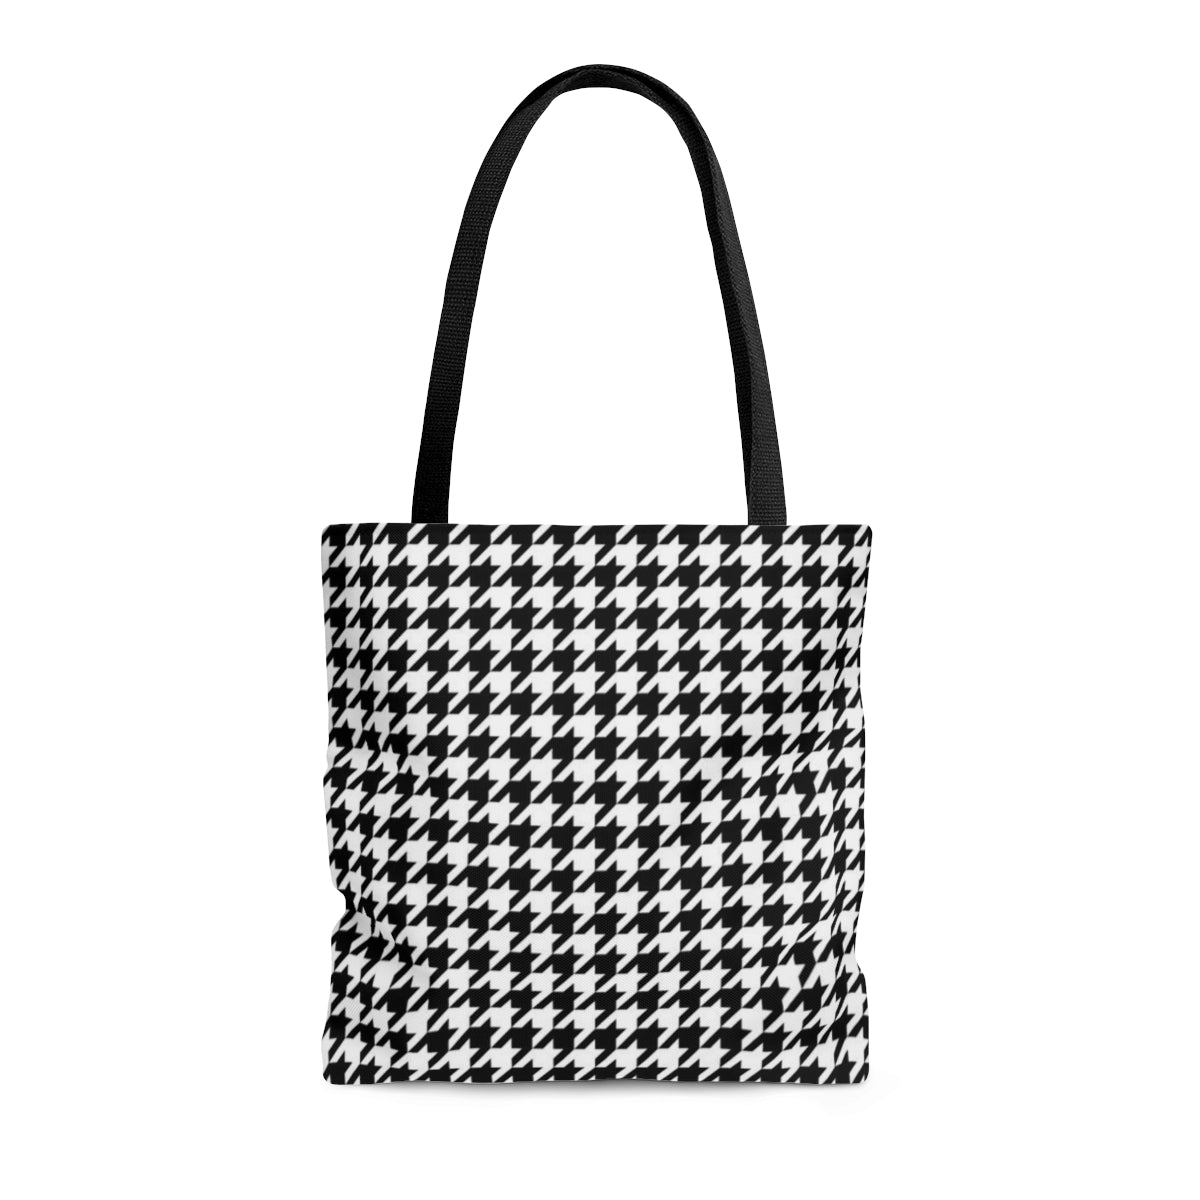 Houndstooth Tote Bag, Black White Cute Canvas Shopping Small Large Travel Reusable Aesthetic Shoulder Bag Starcove Fashion